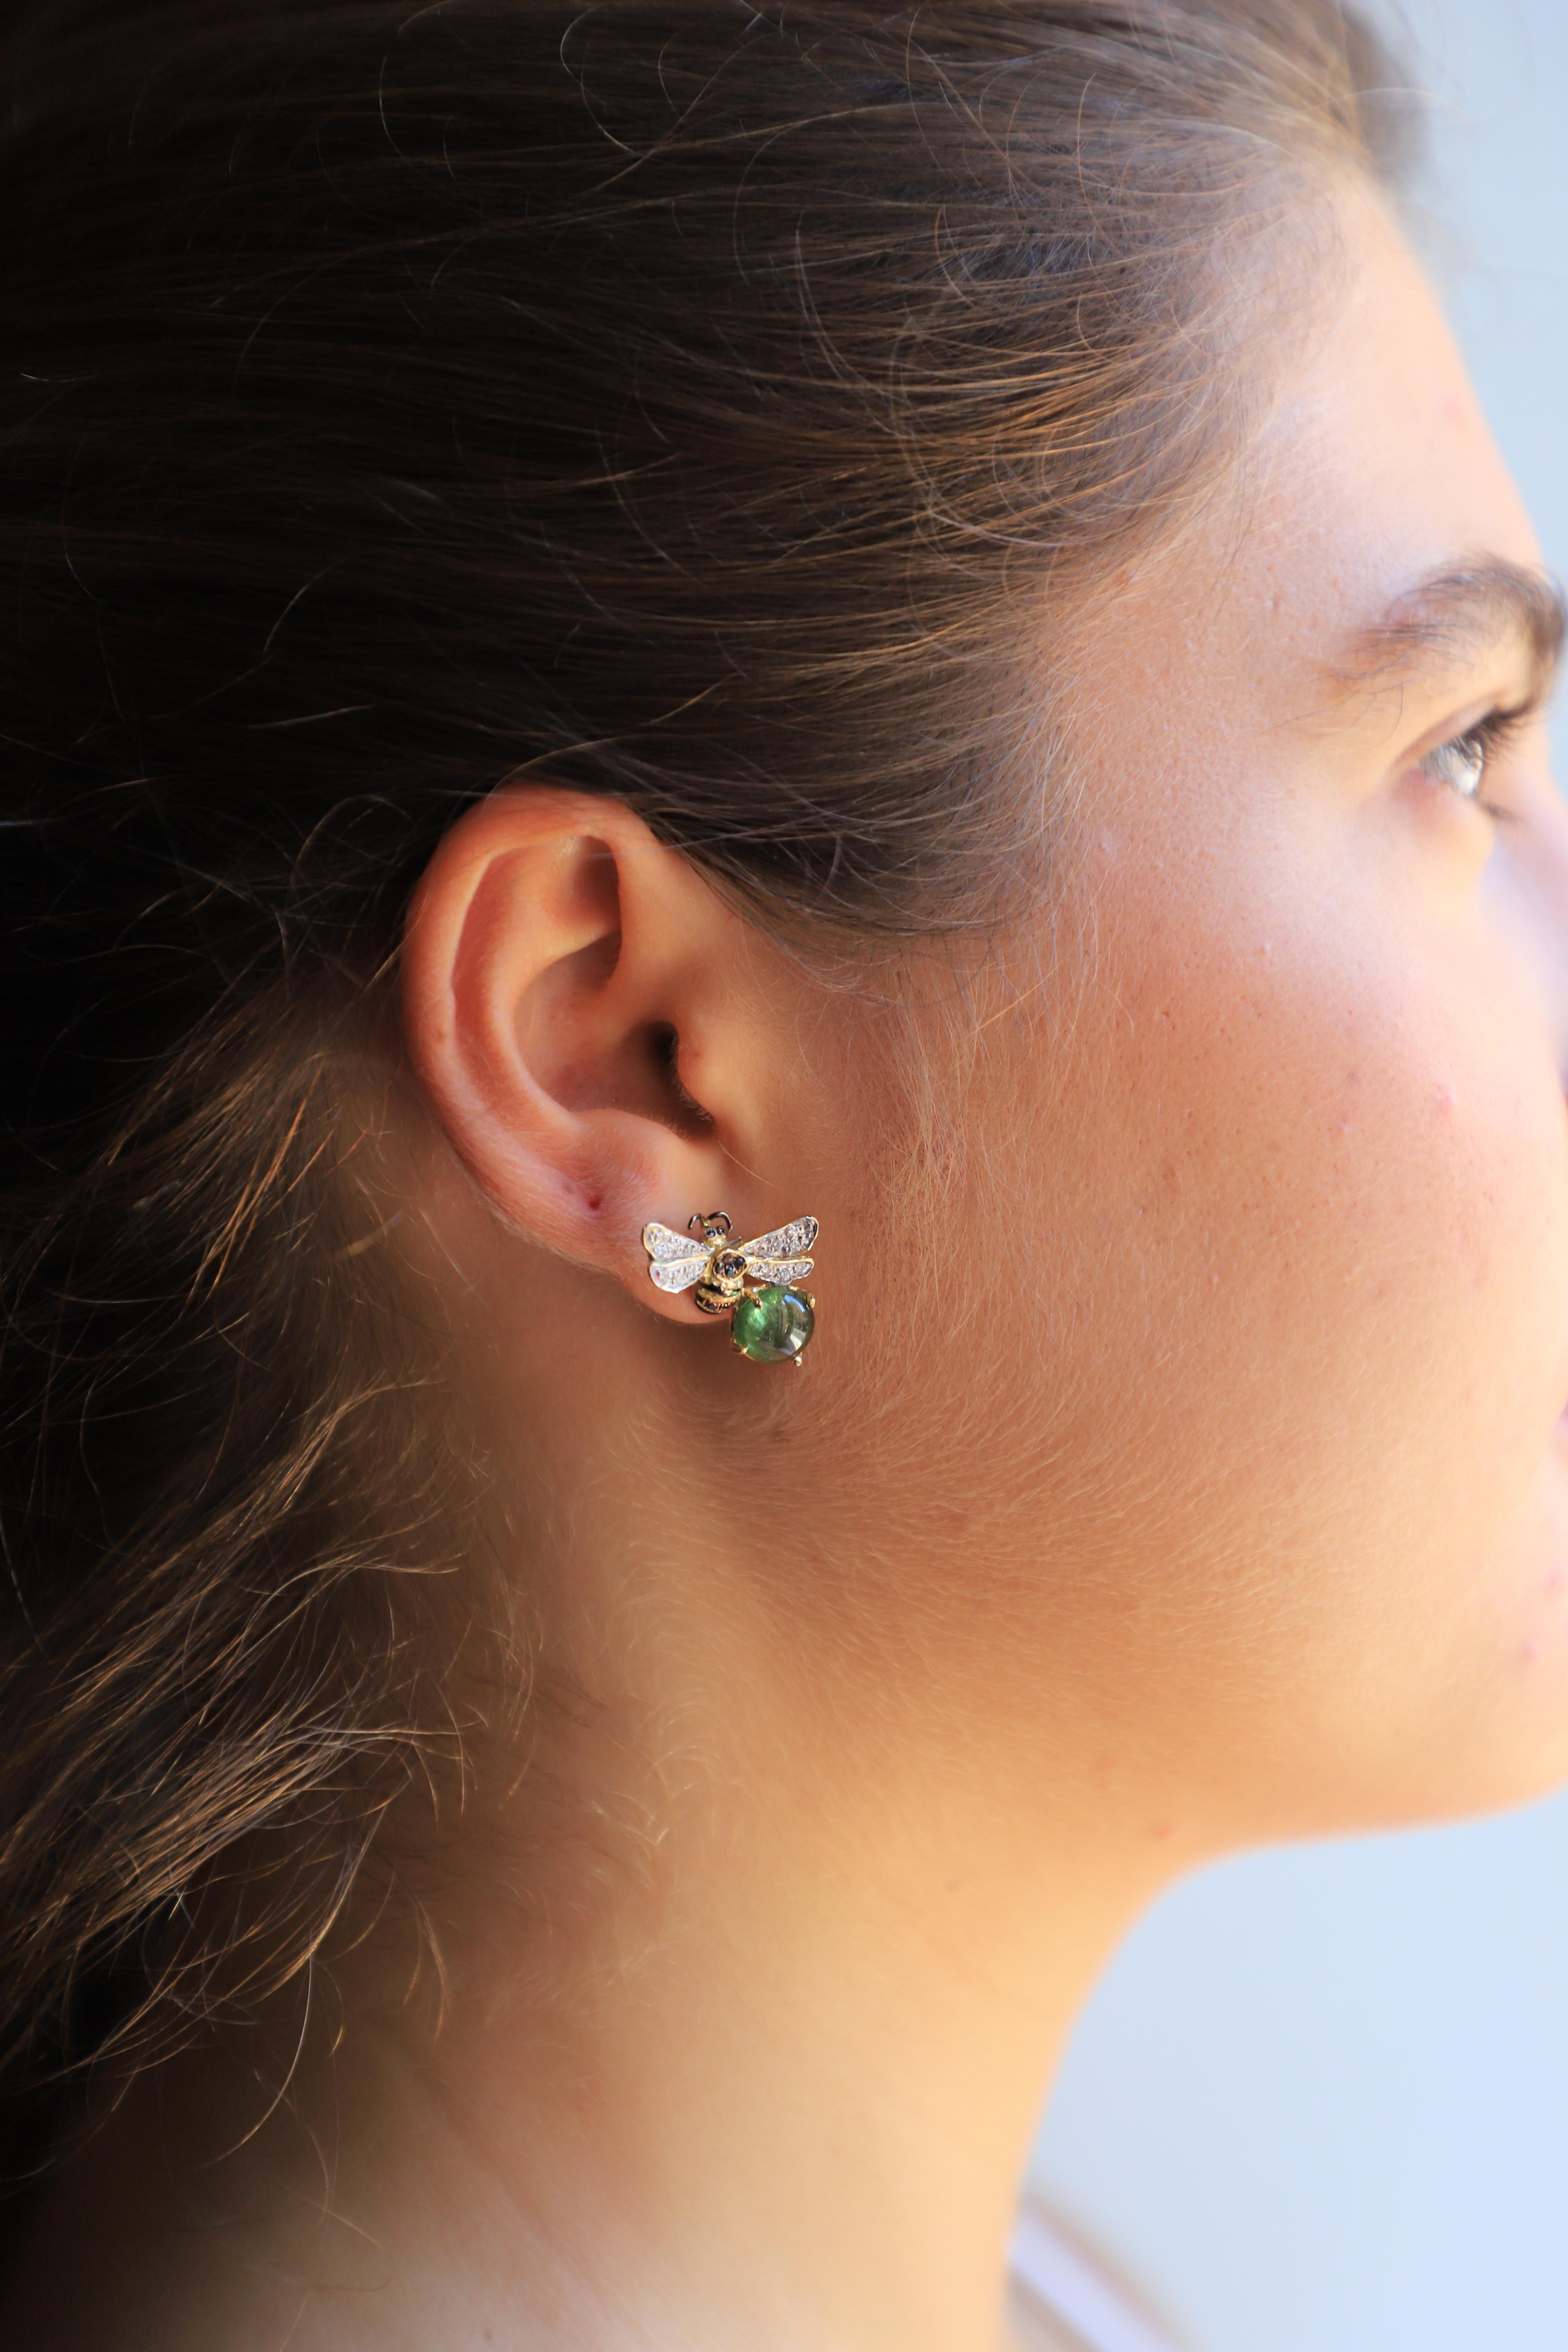 Rossella Ugolini Design Collection 18 Karat Yellow Gold 4 Carats Green Tourmaline 0.16 Carat White Diamond 0.18 Carat Black Diamonds Bees Handcrafted Stud Earrings. 
This collection was born to celebrate a precious creature, essential for our